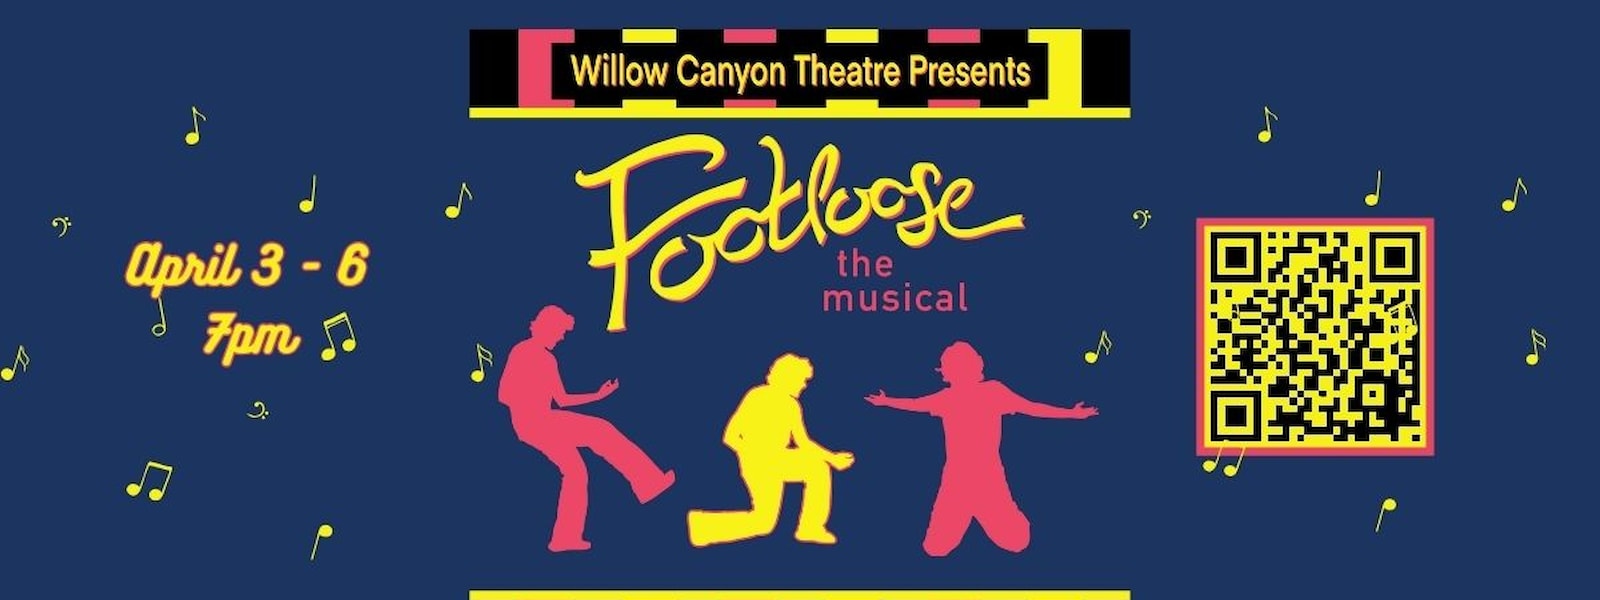 Footloose the musical flyer